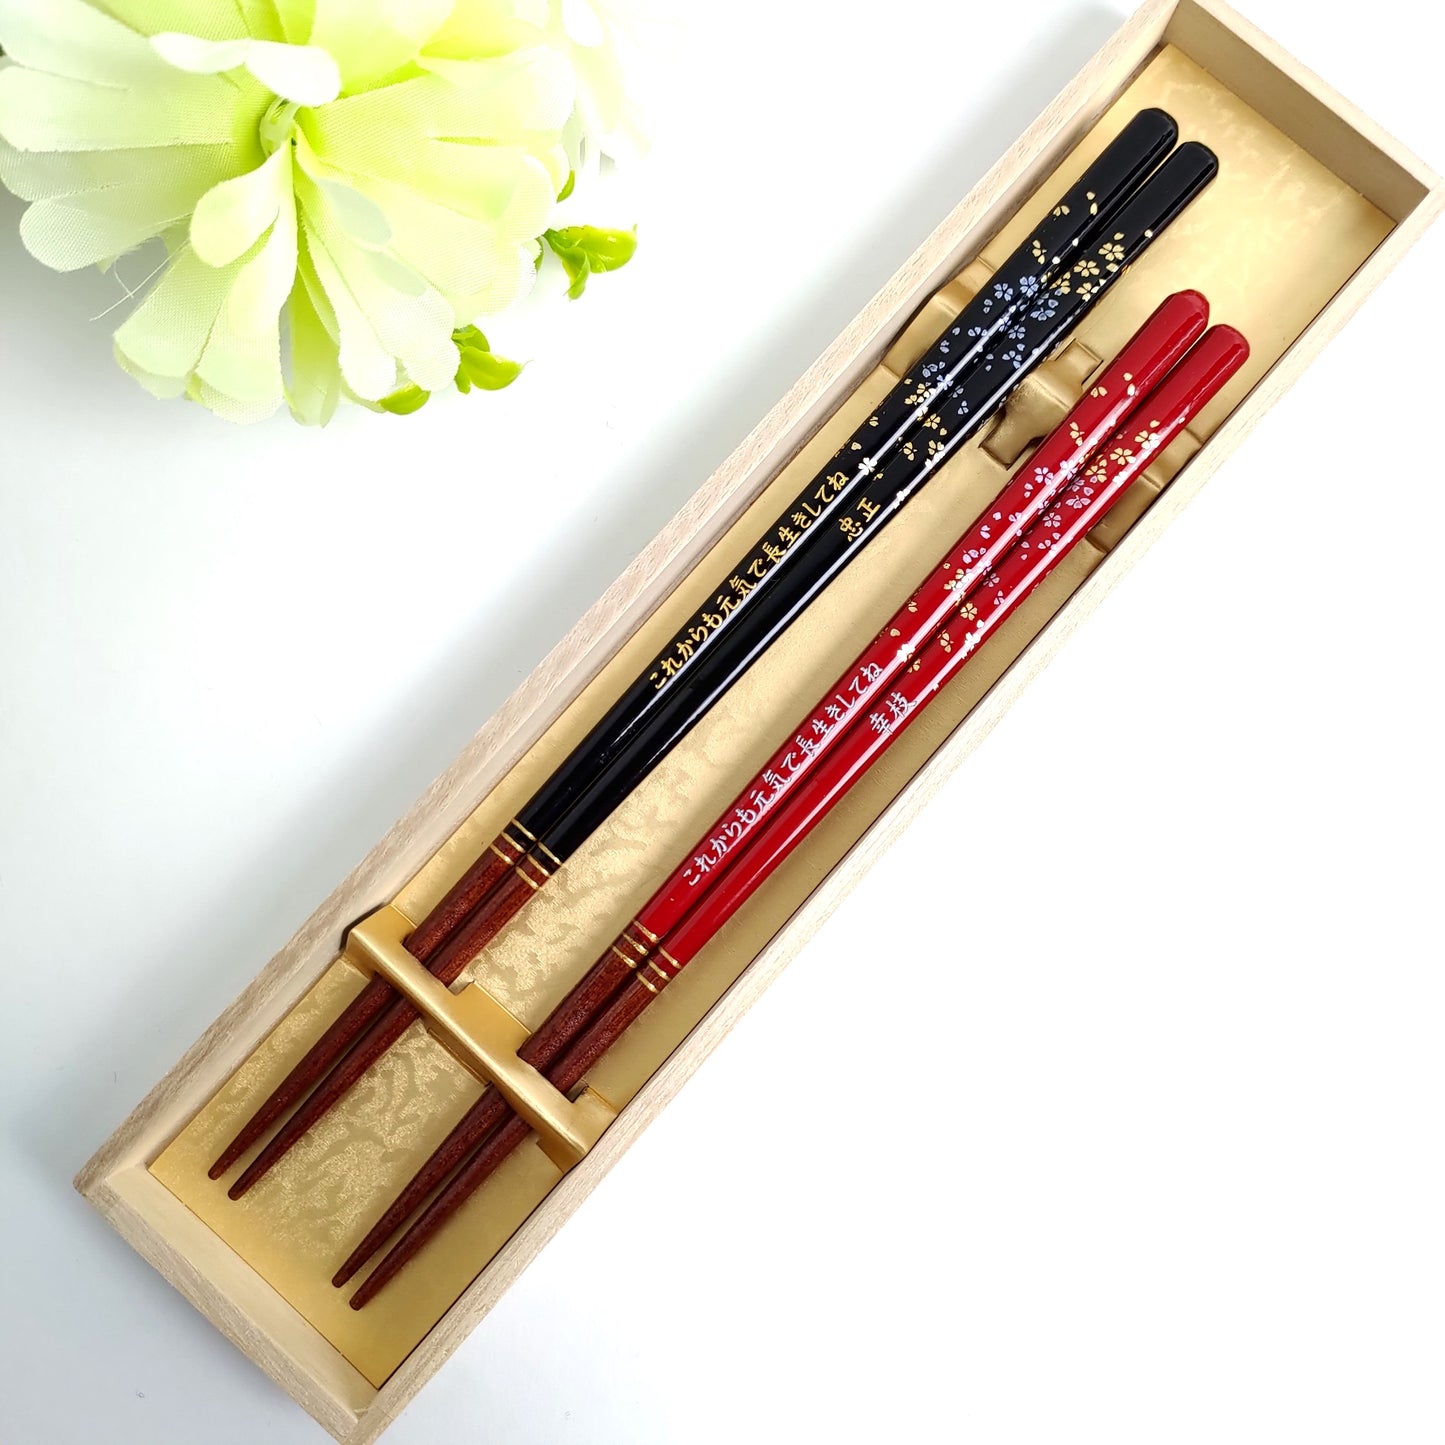 Sprinkled flowers Japanese chopsticks black red - DOUBLE PAIR WITH ENGRAVED WOODEN BOX SET